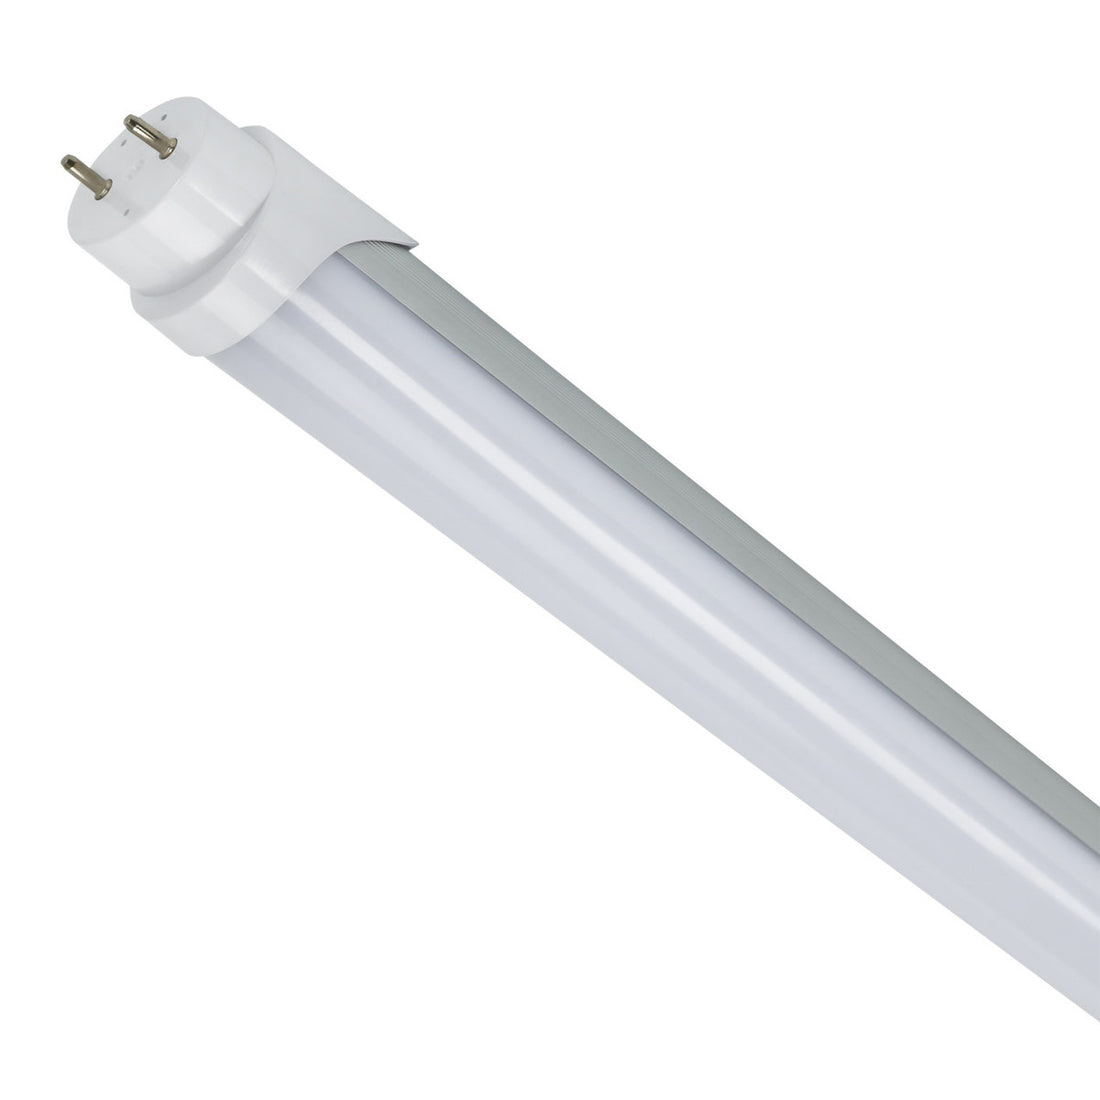 4ft LED Tube Light - 18W - 4000K - Dual-Mode - 100-277VAC Input, Non-Dimming, Oval Aluminum Housing, Frosted Lens - 30 Pack